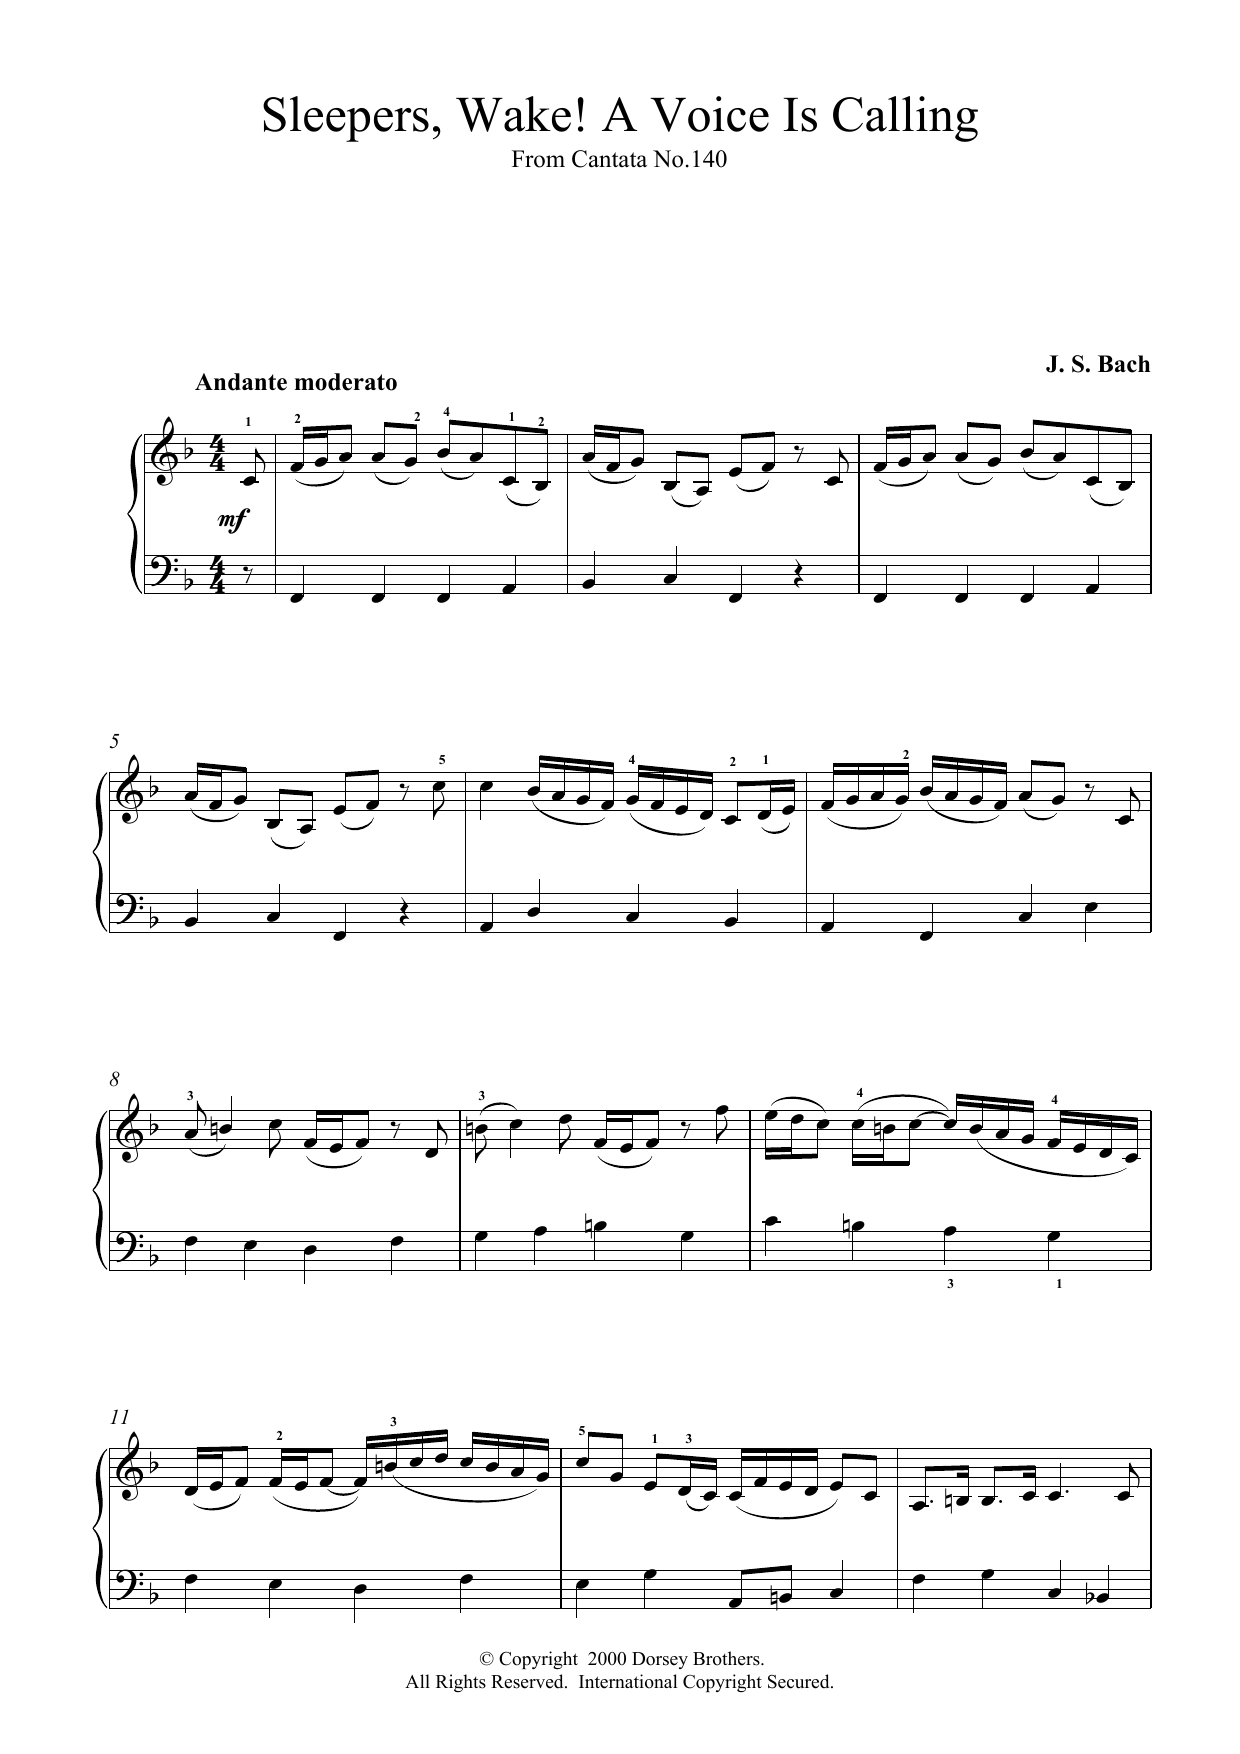 Johann Sebastian Bach Sleepers, Wake! A Voice Is Calling sheet music notes and chords. Download Printable PDF.